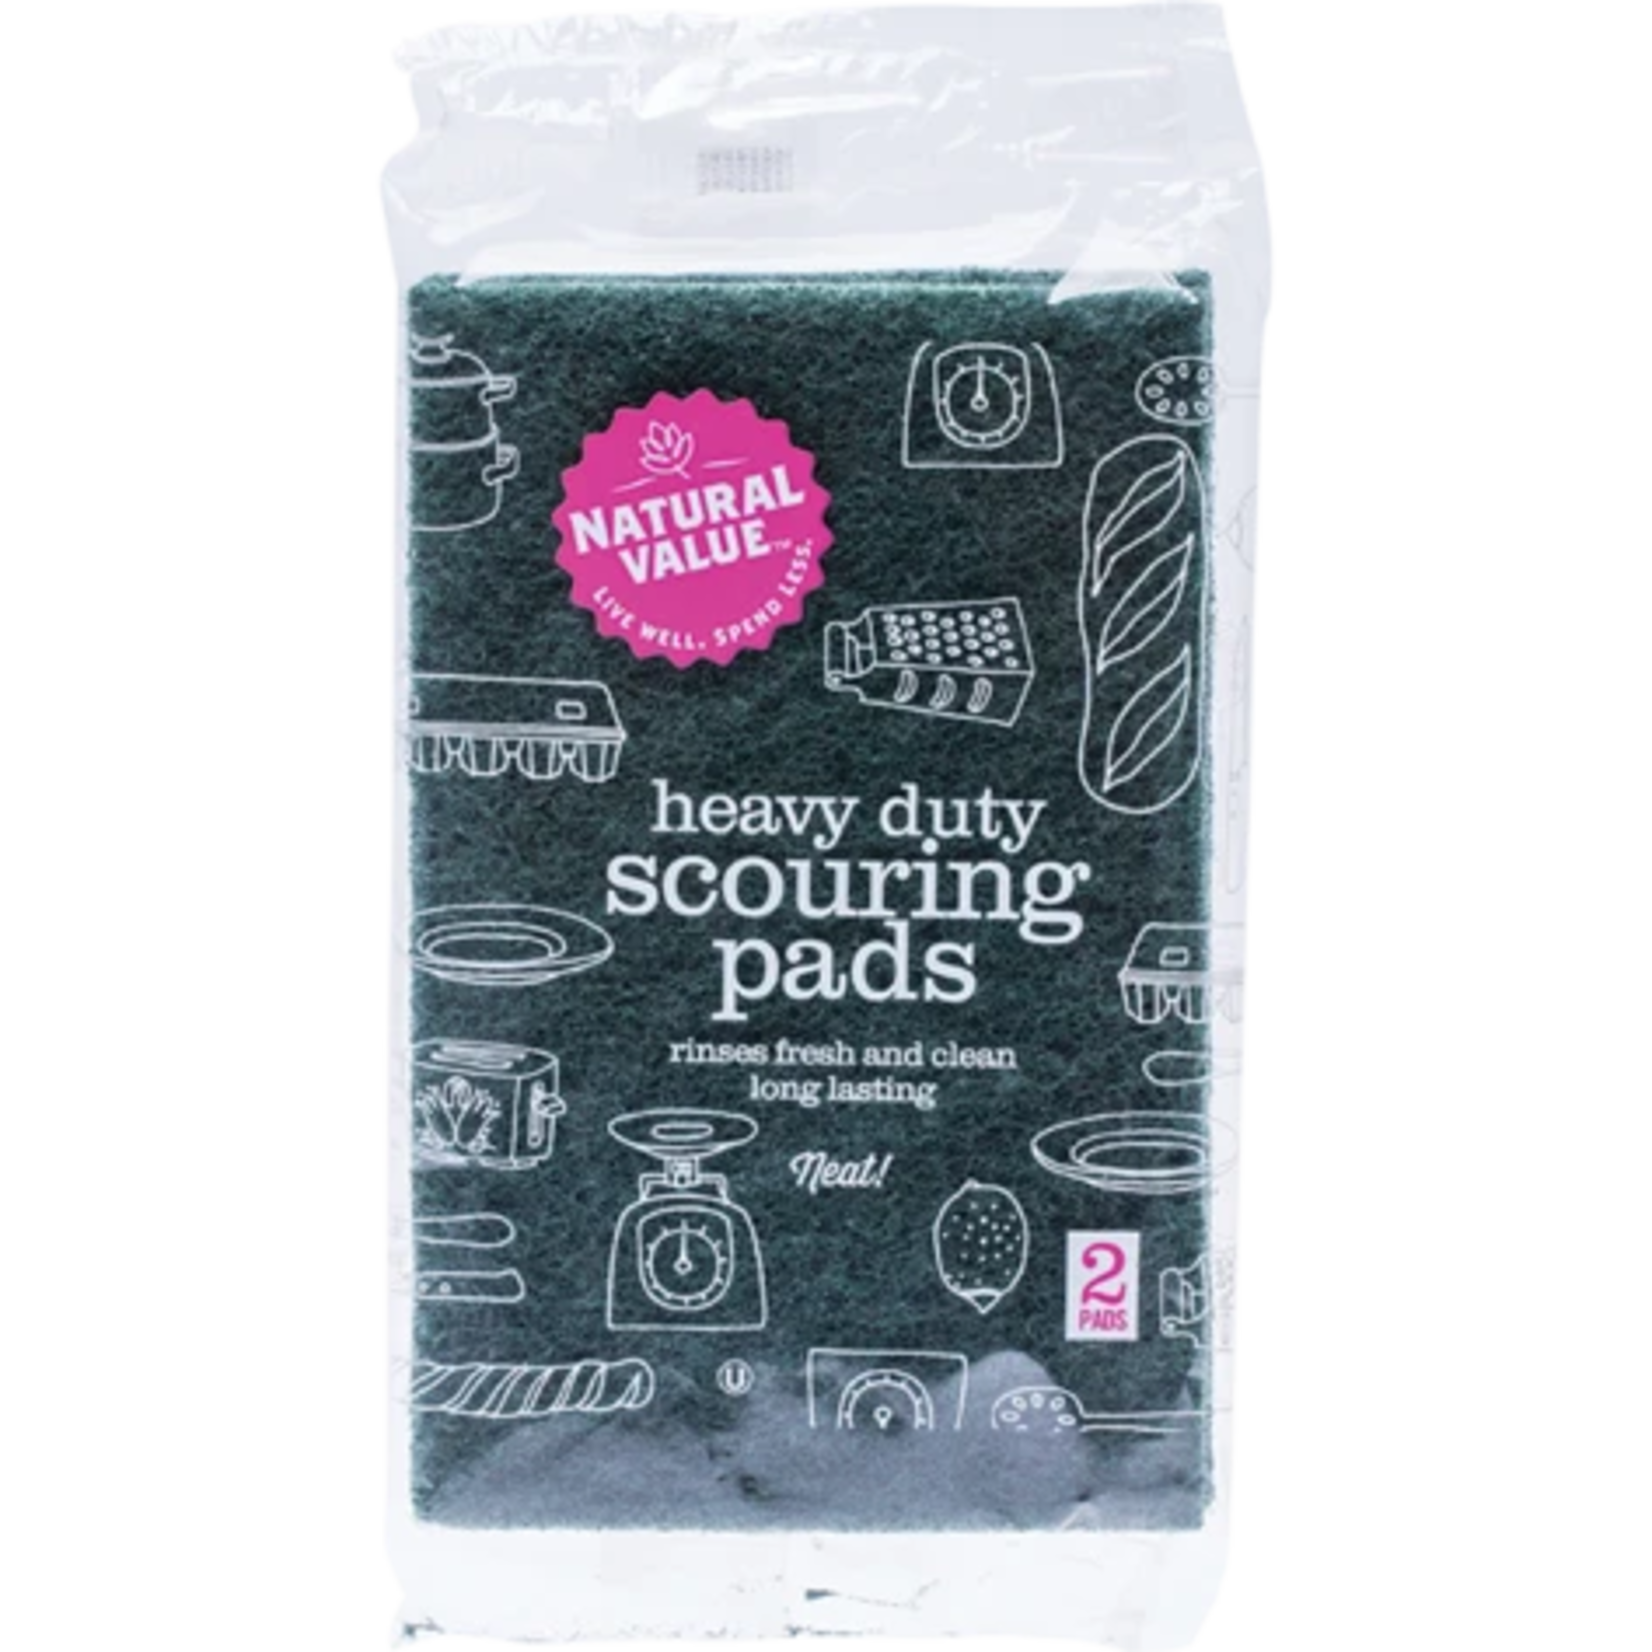 Natural Value Natural Value Heavy Duty Scouring pads x 2pk